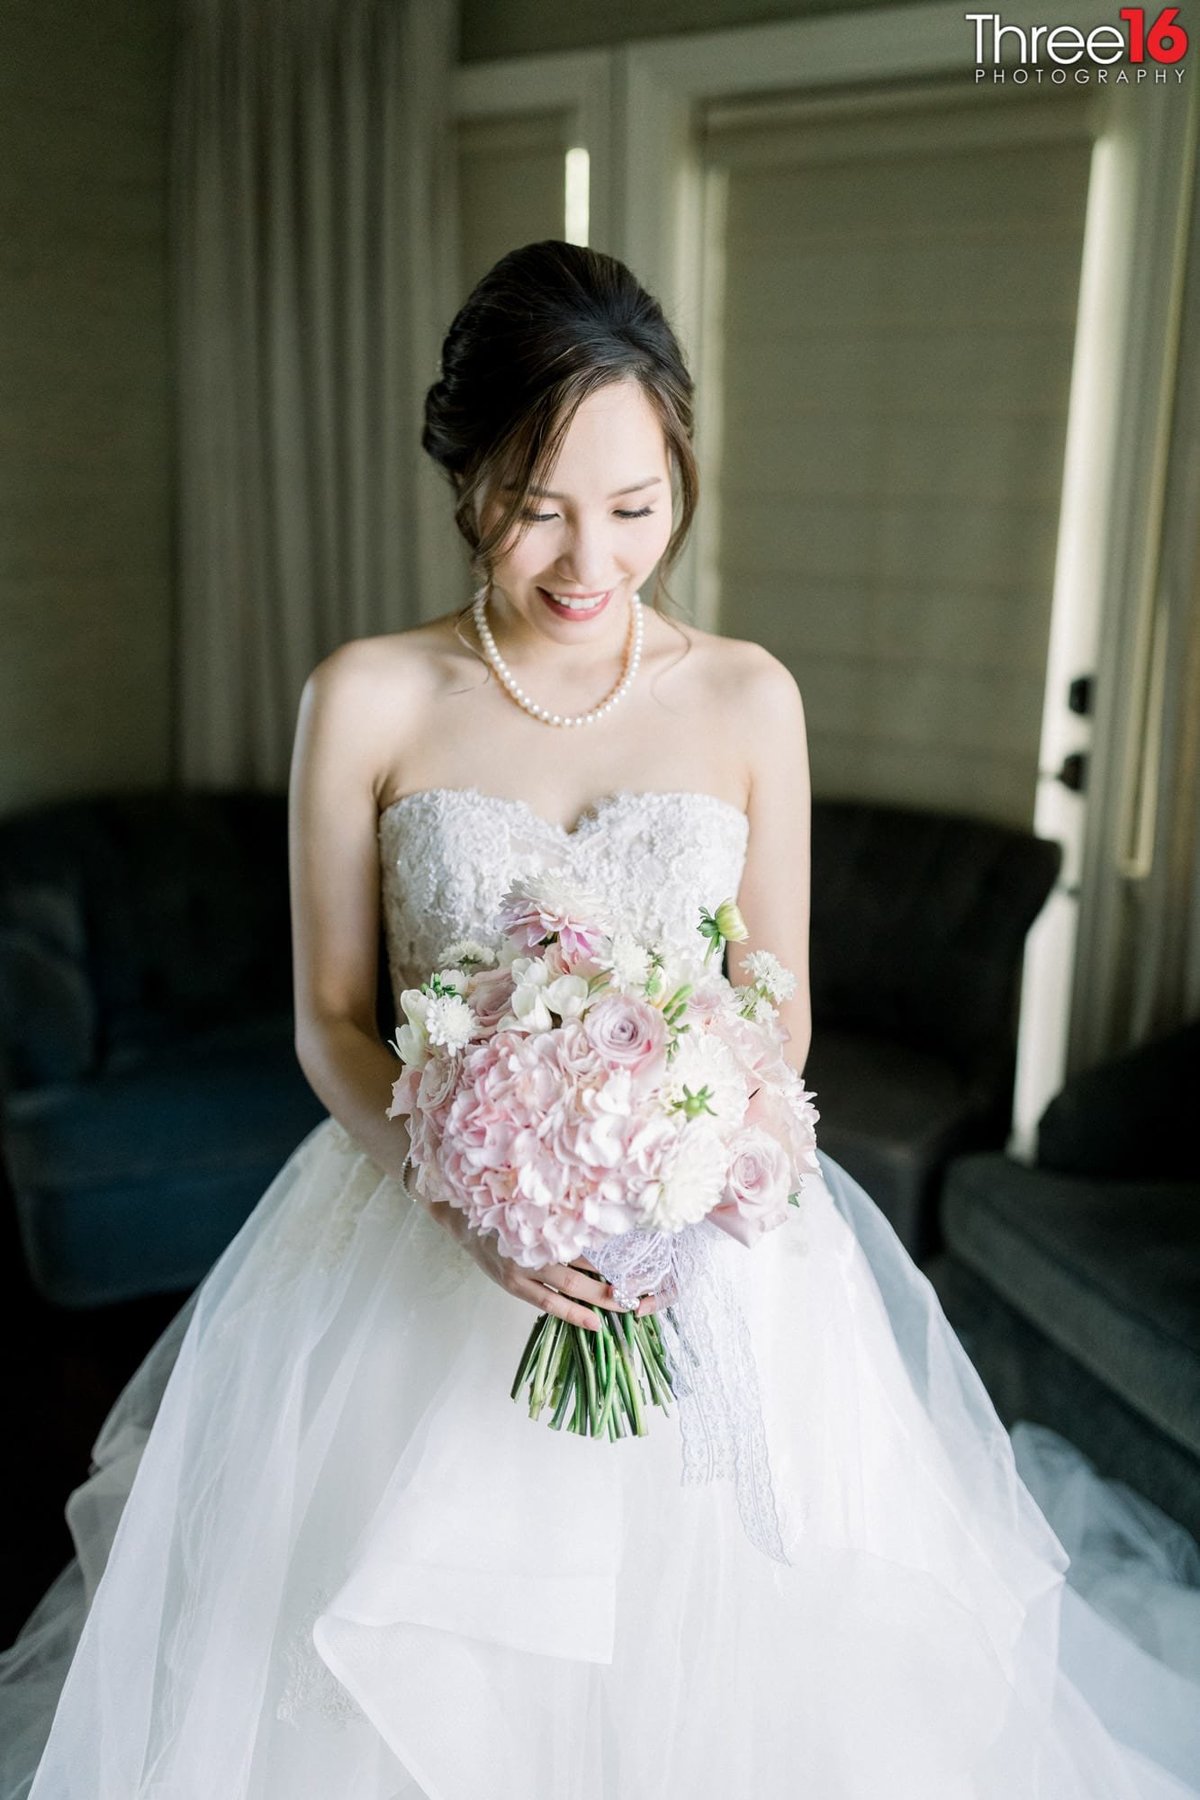 Bride poses in her wedding dress and bouquet in the dressing room prior to the start of the wedding ceremony